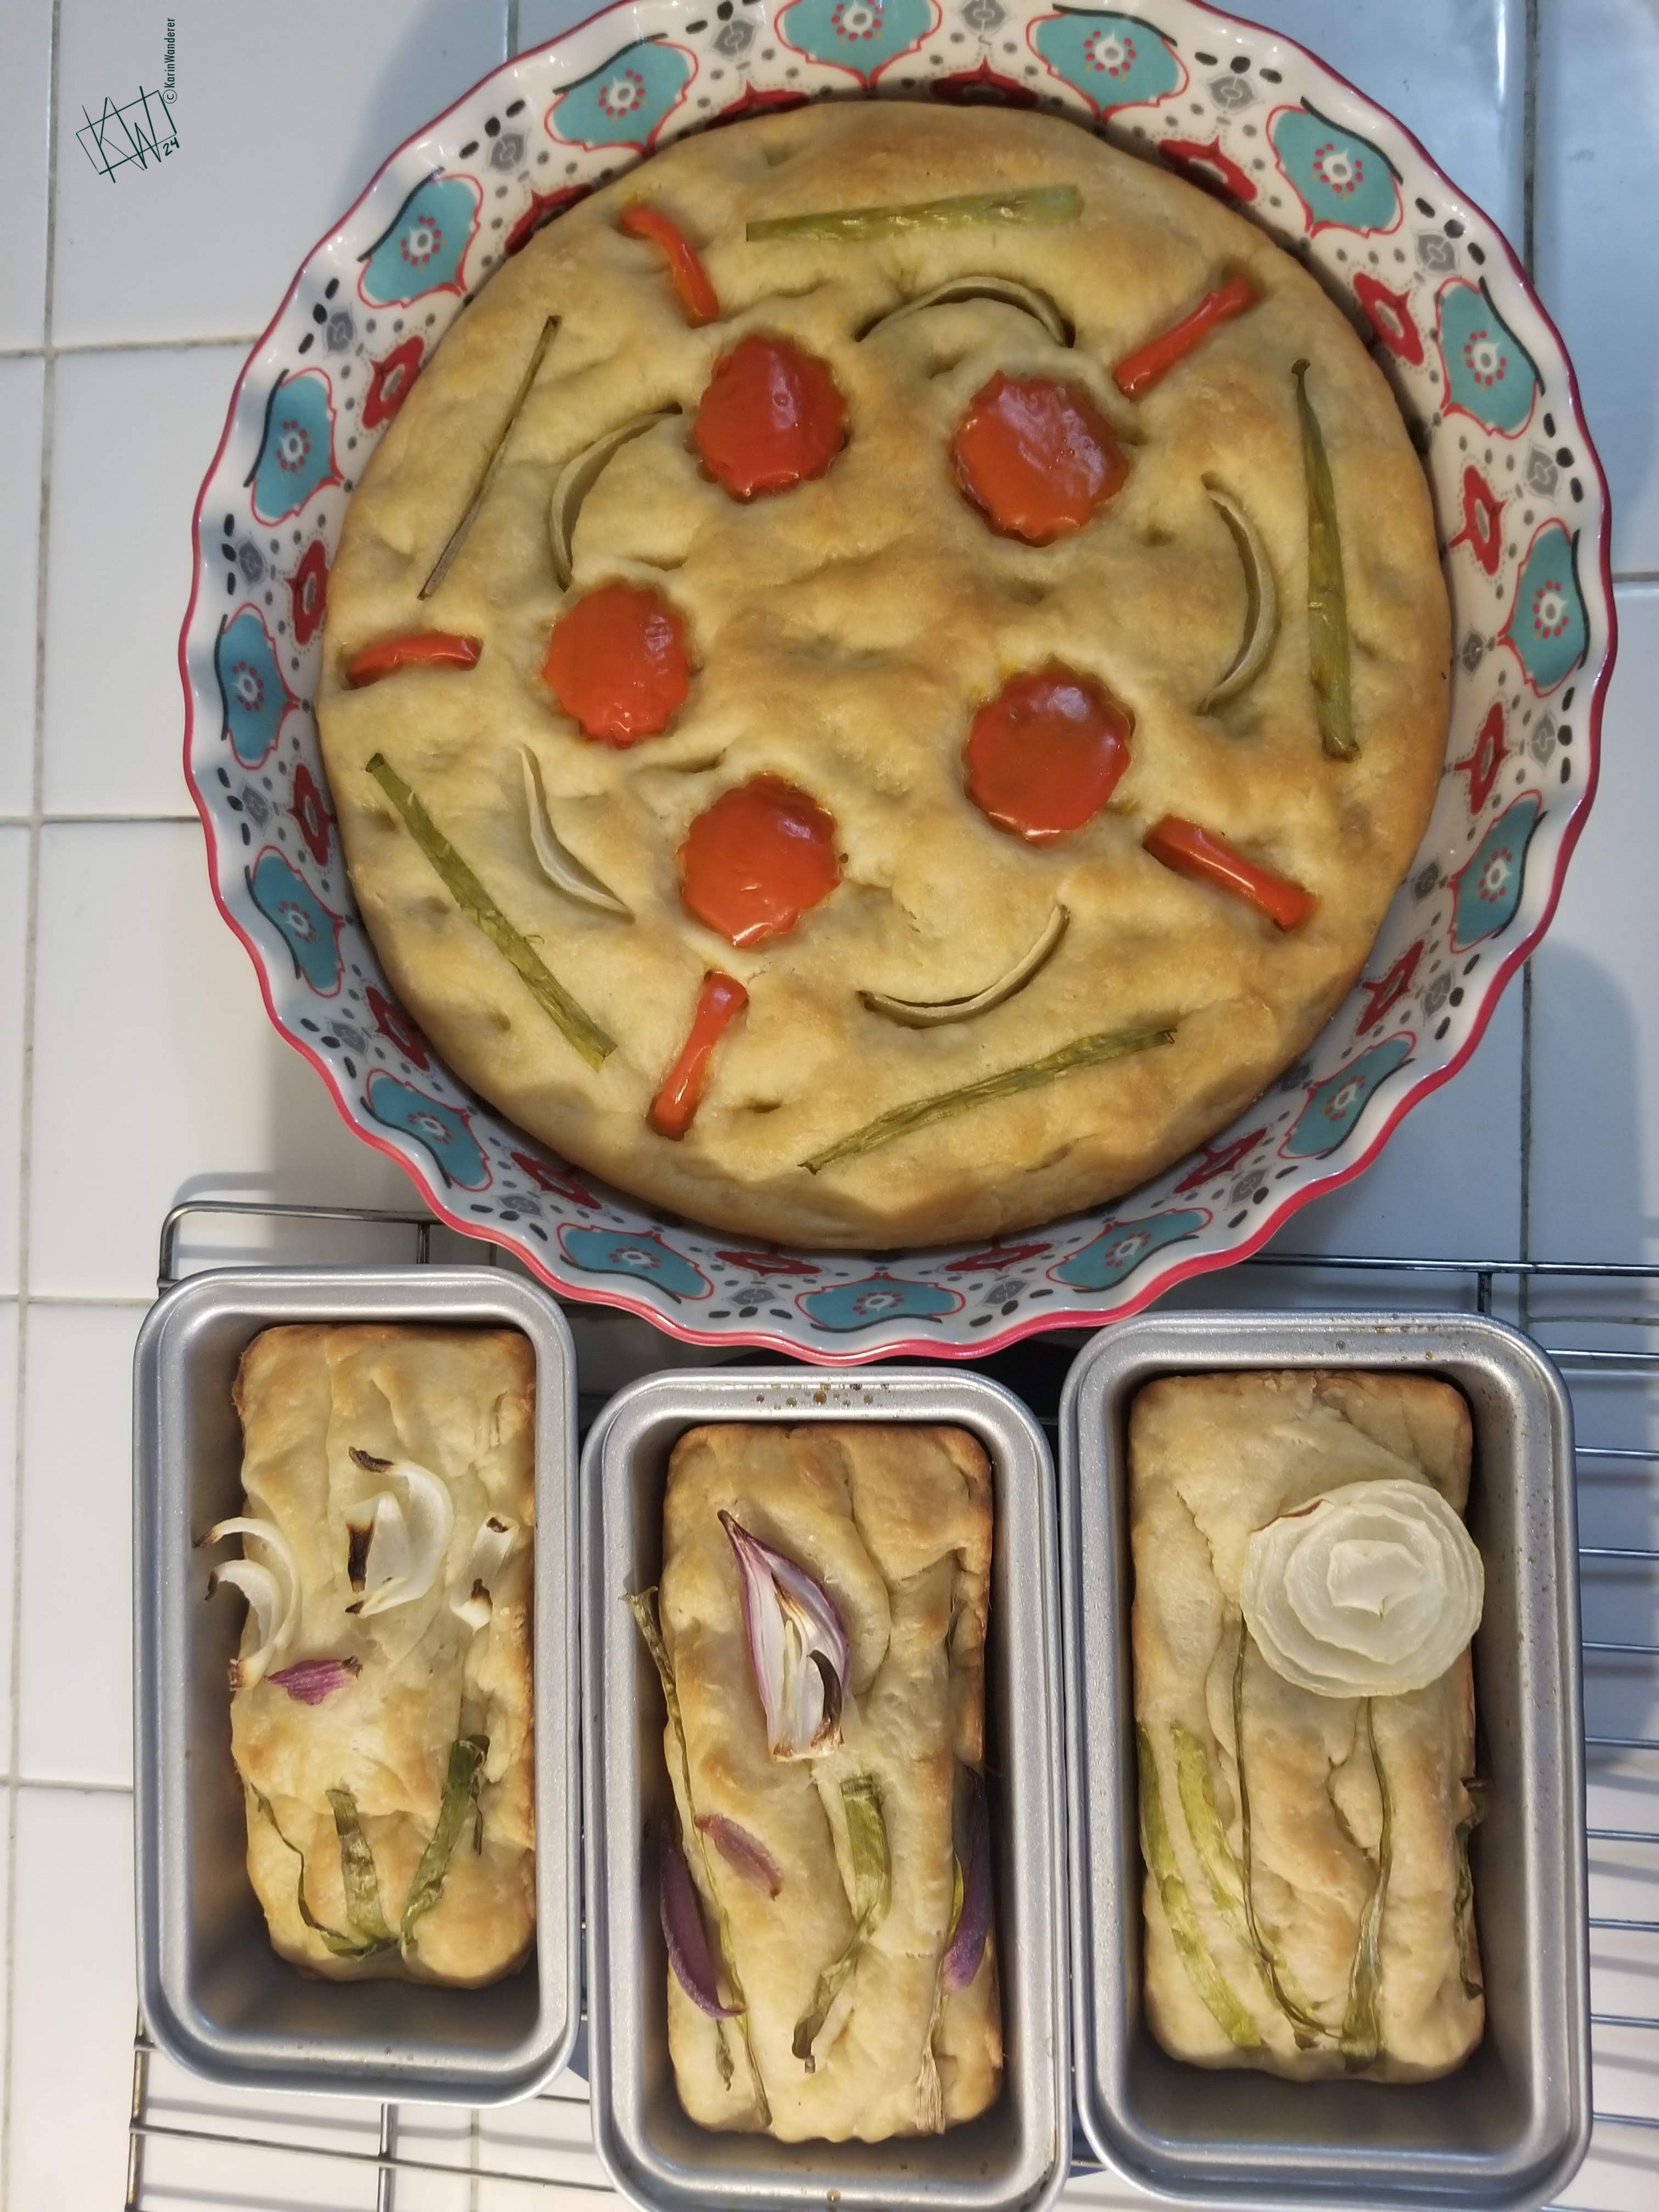 1 round & 4 small loaves of golden brown focaccia, decorated with produce. The round one has a mandala made with red peppers & red & green onions. The rectangular ones have a mess of sliced onions that were supposed to look like flowers.